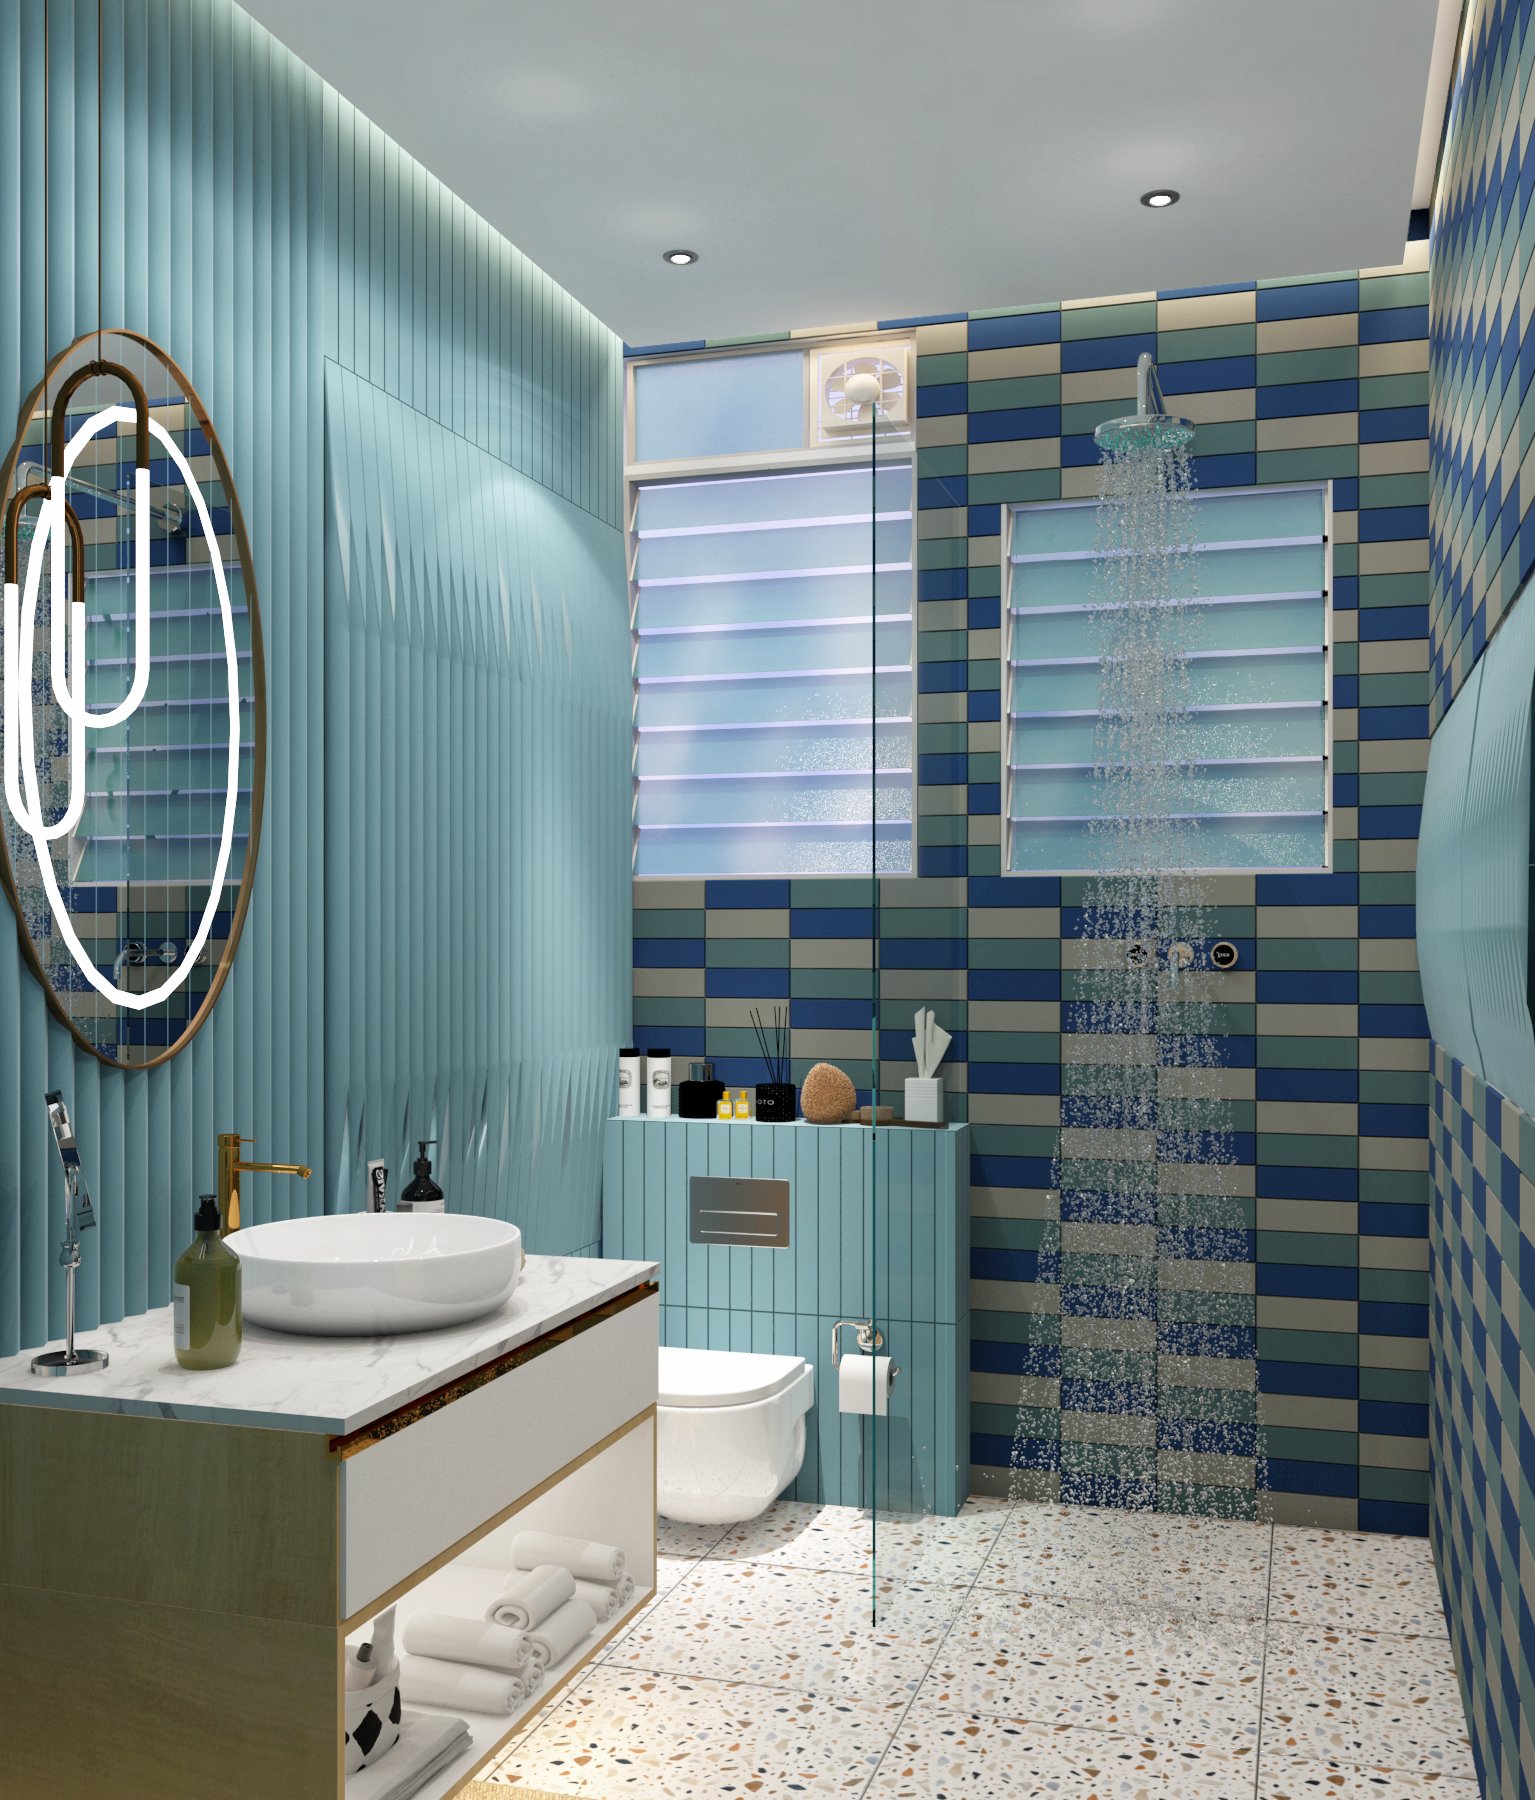 <span  class="uc_style_uc_tiles_grid_image_elementor_uc_items_attribute_title" style="color:#ffffff;">BATHROOM 9</span>